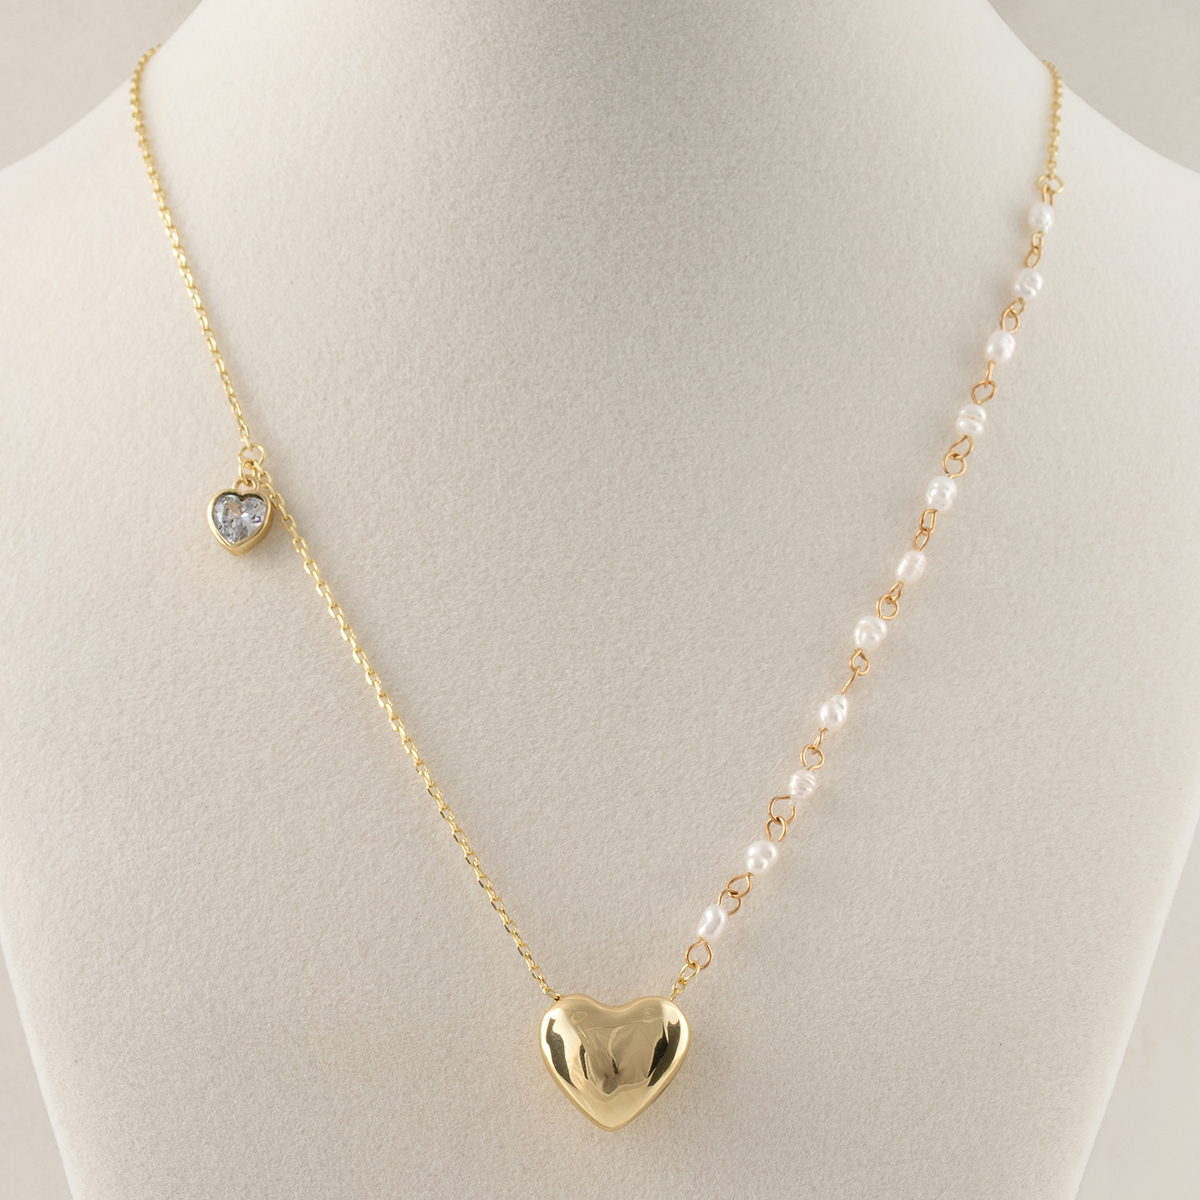 NECKLACE HEART PEARL GOLD ADJUSTABLE